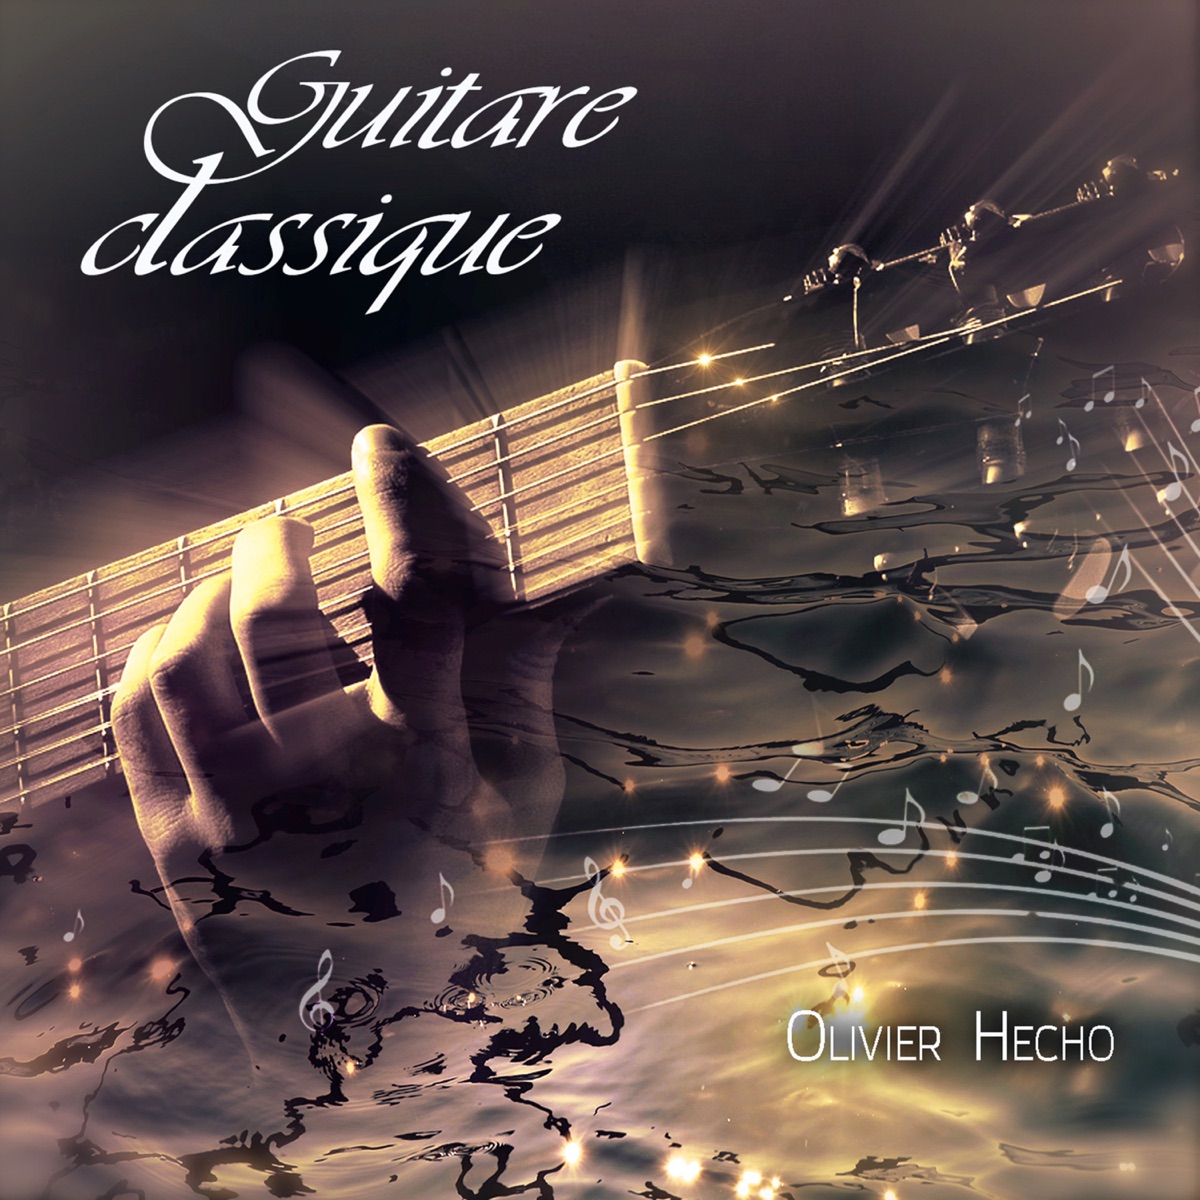 Guitare classique by Olivier Hecho on Apple Music